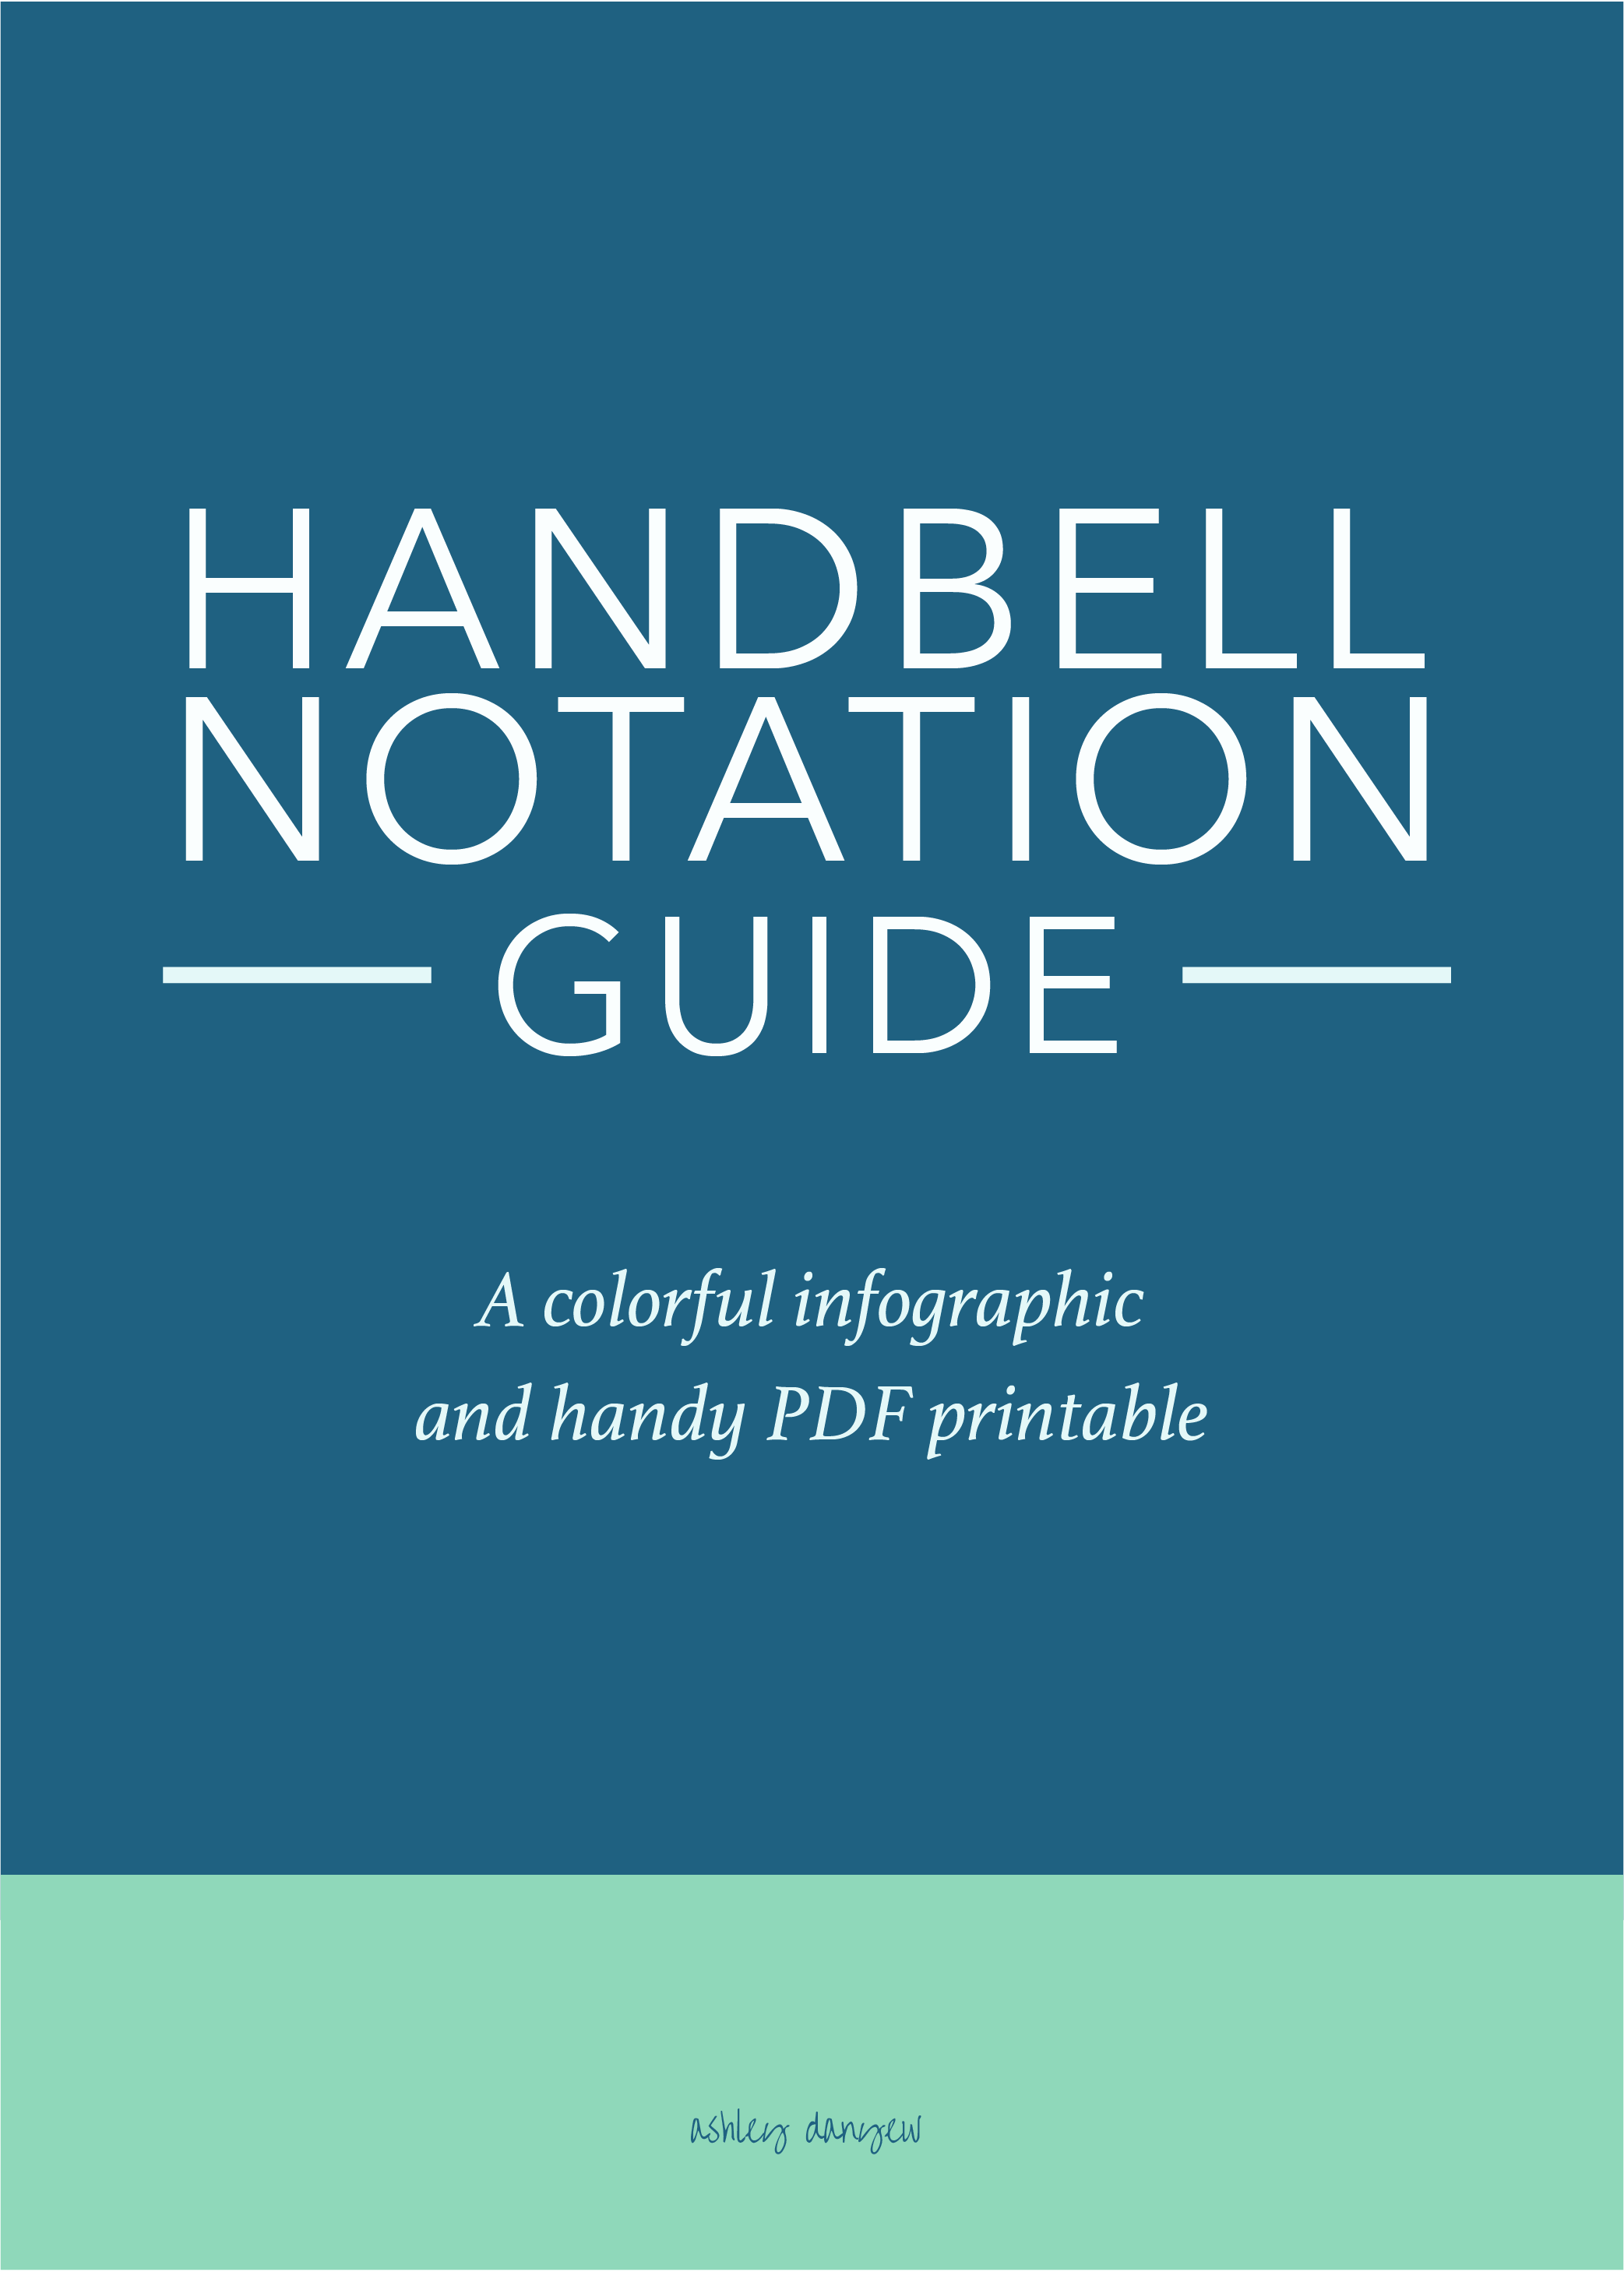 Handbell Notation Guide [Infographic]